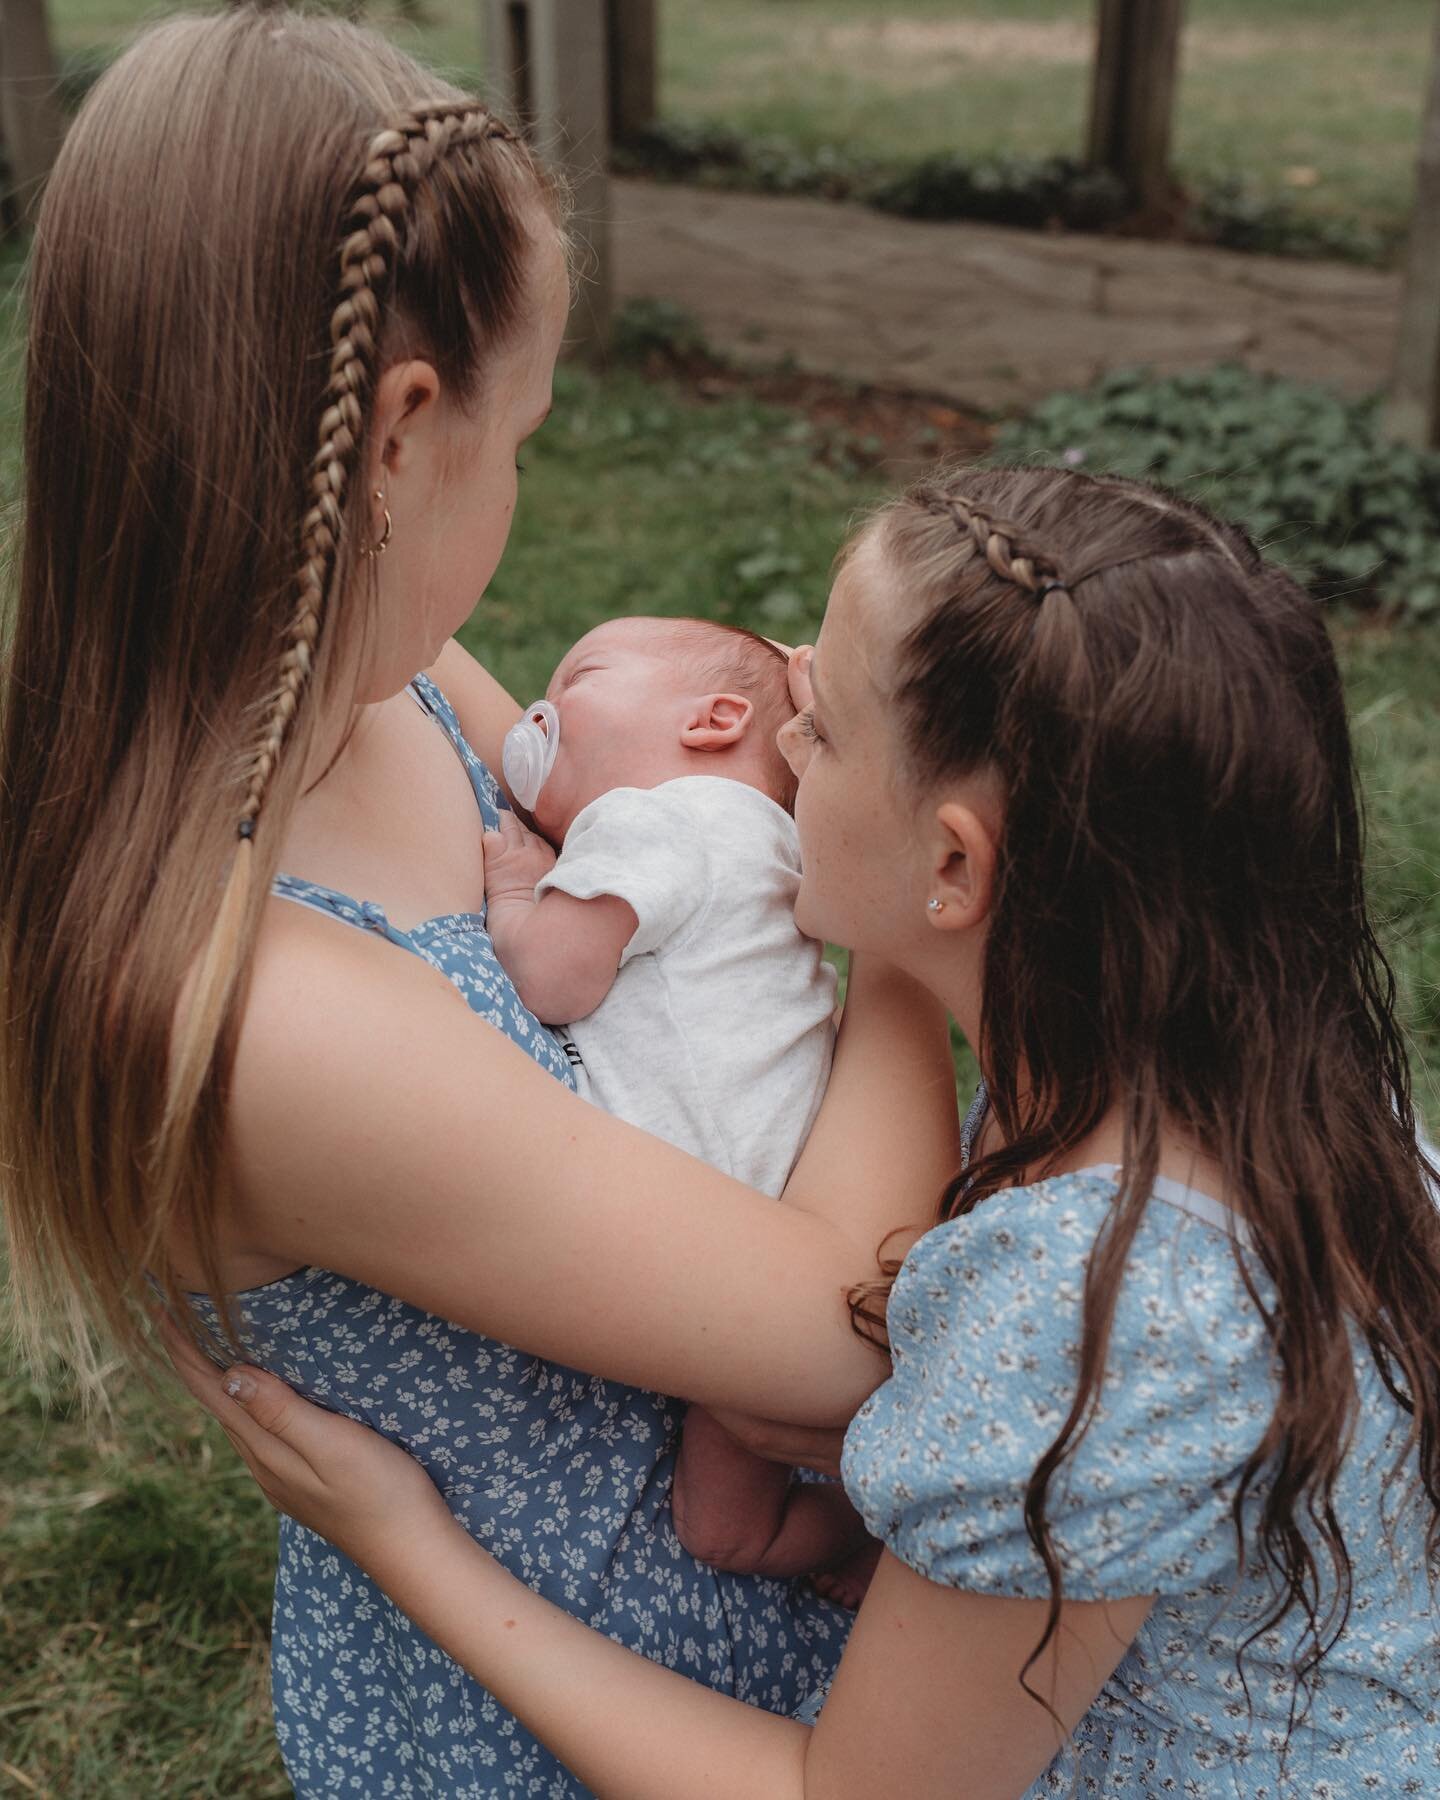 Bella is one lucky little girl having these 2 amazing big sisters 🥰

Her mums even luckier to have 2 more babysitters in a few years time 😉

#yorkphotographer #yorkshirephotographer #familyphotography #familyphotos #familyphotoshoot #familyphotogra